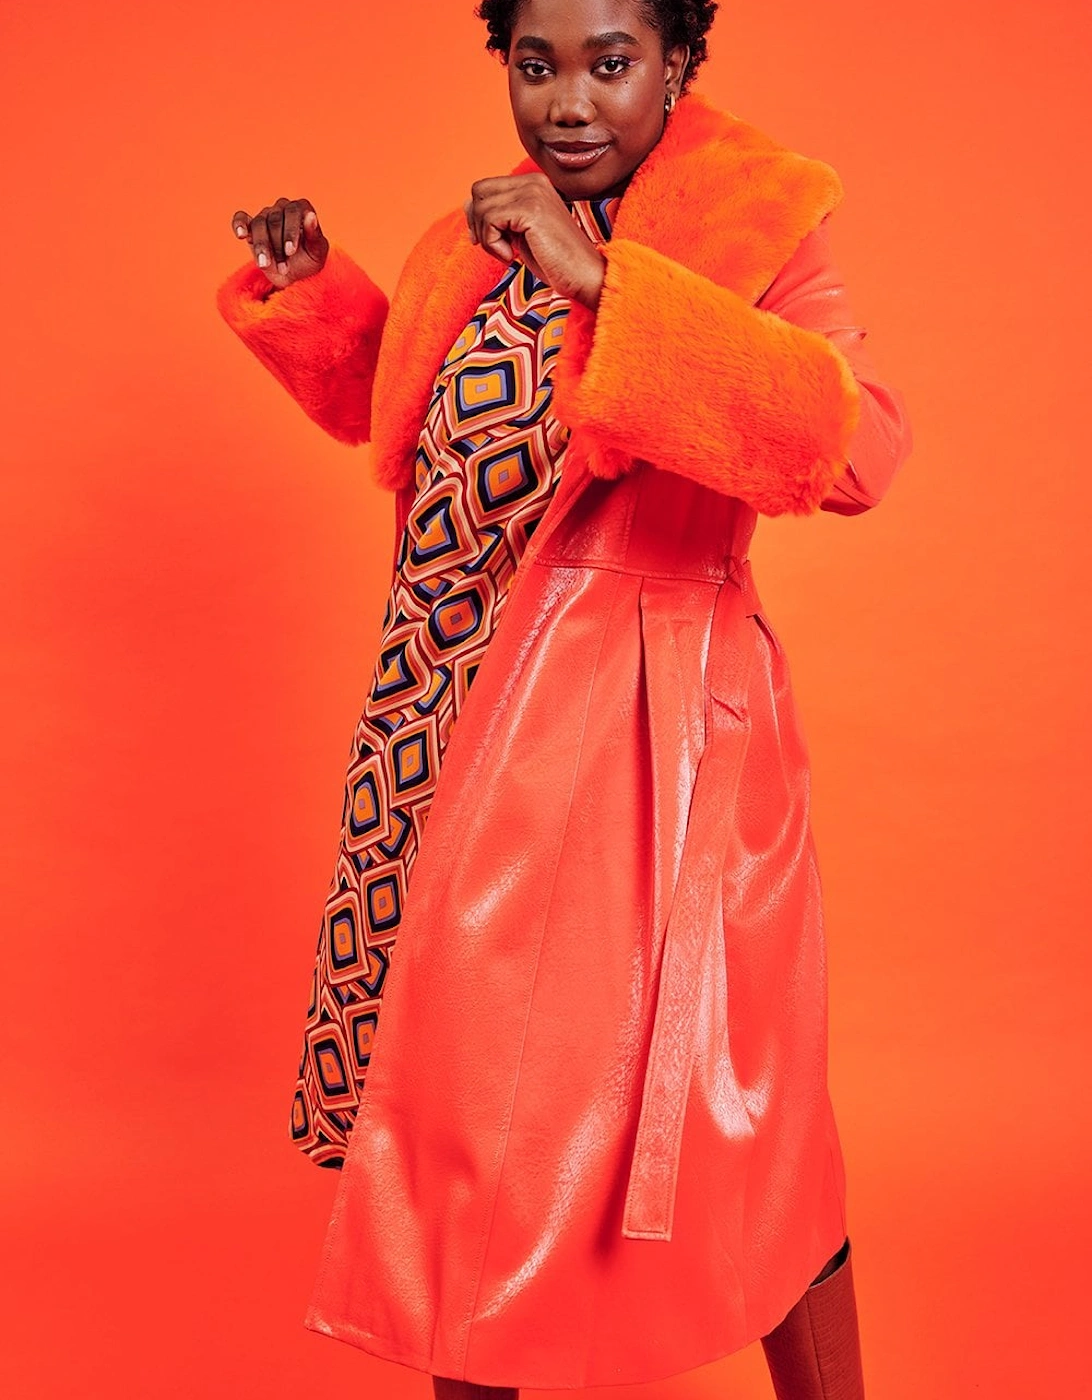 Orange Trench Style Belted Coat with Faux Fur Cuffs and Collar